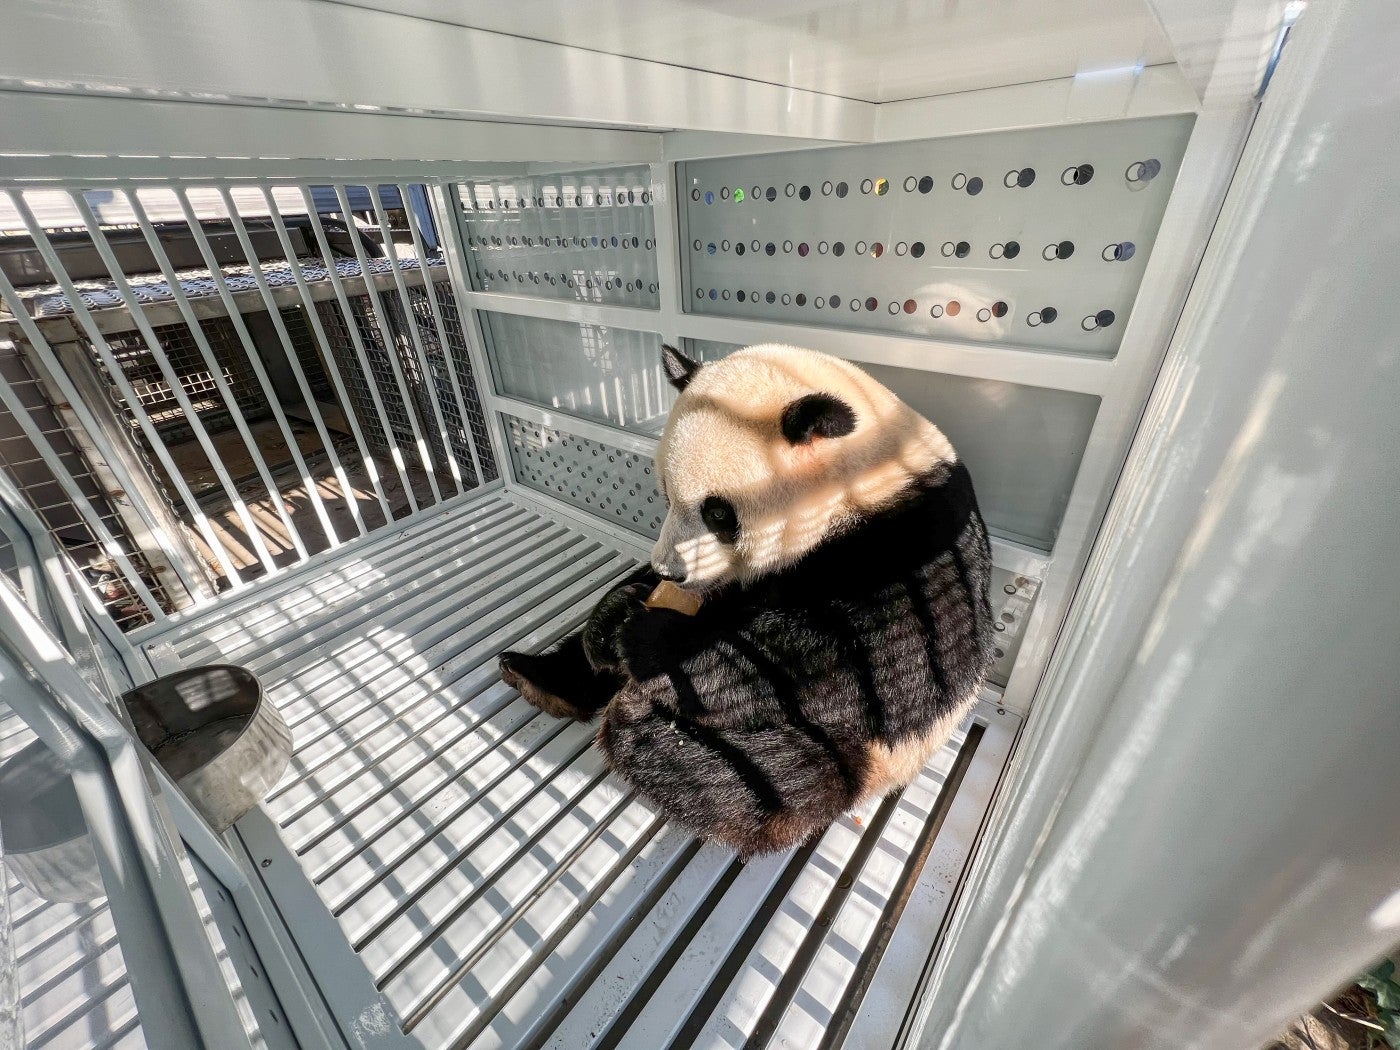 Black and white giant panda Xiao Qi Ji eating a frozen fruitsicle inside a white travel crate made of steel and plexiglass.